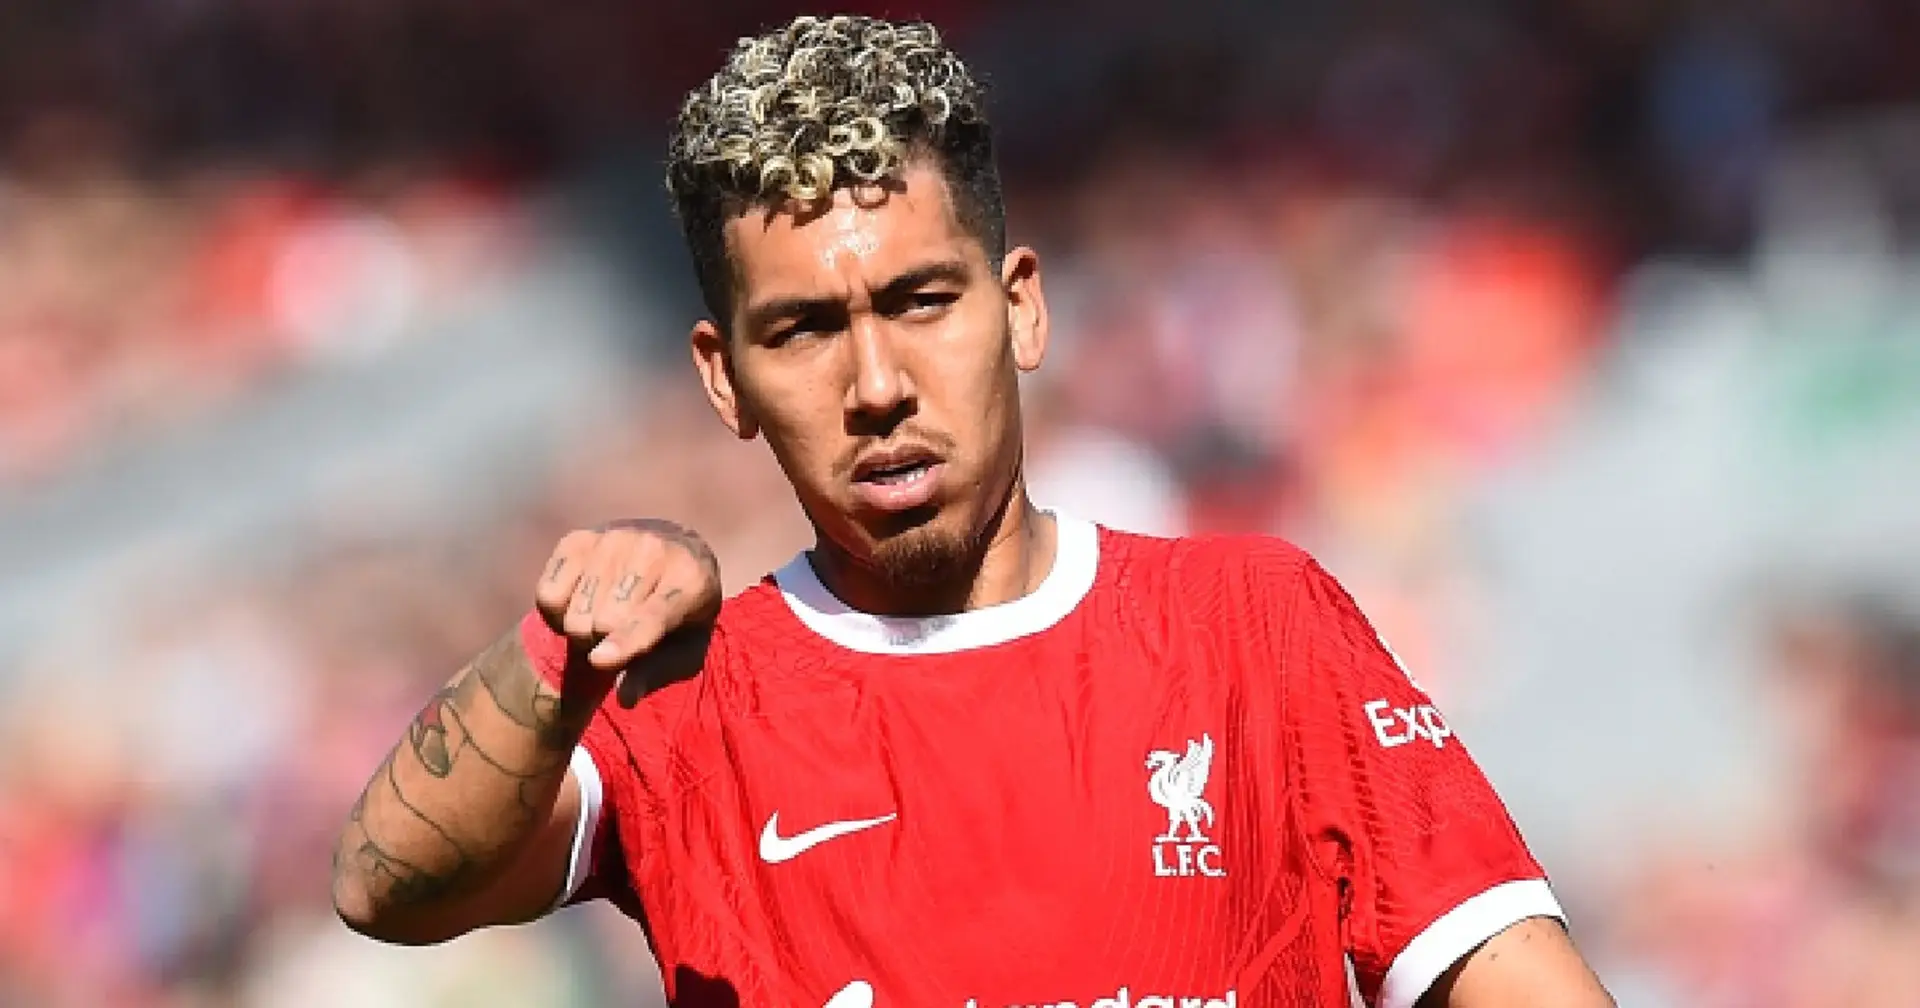 'God didn't want me to stay at Liverpool': Firmino explains his exit